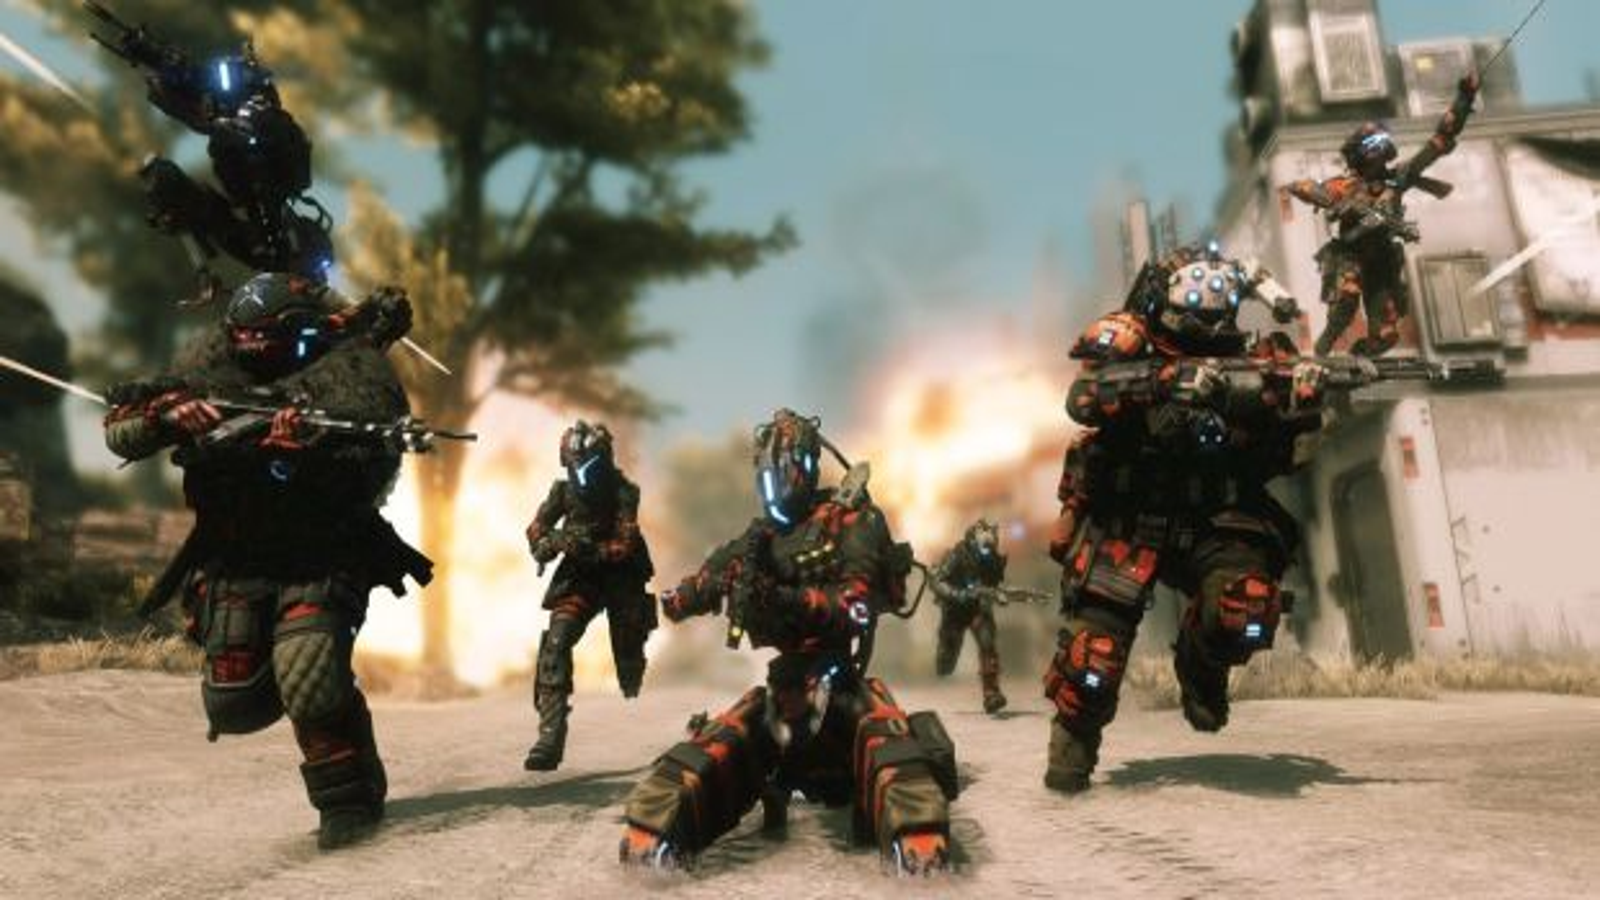 See 4 Minutes Of Amazing TITANFALL 2 Multiplayer — GameTyrant